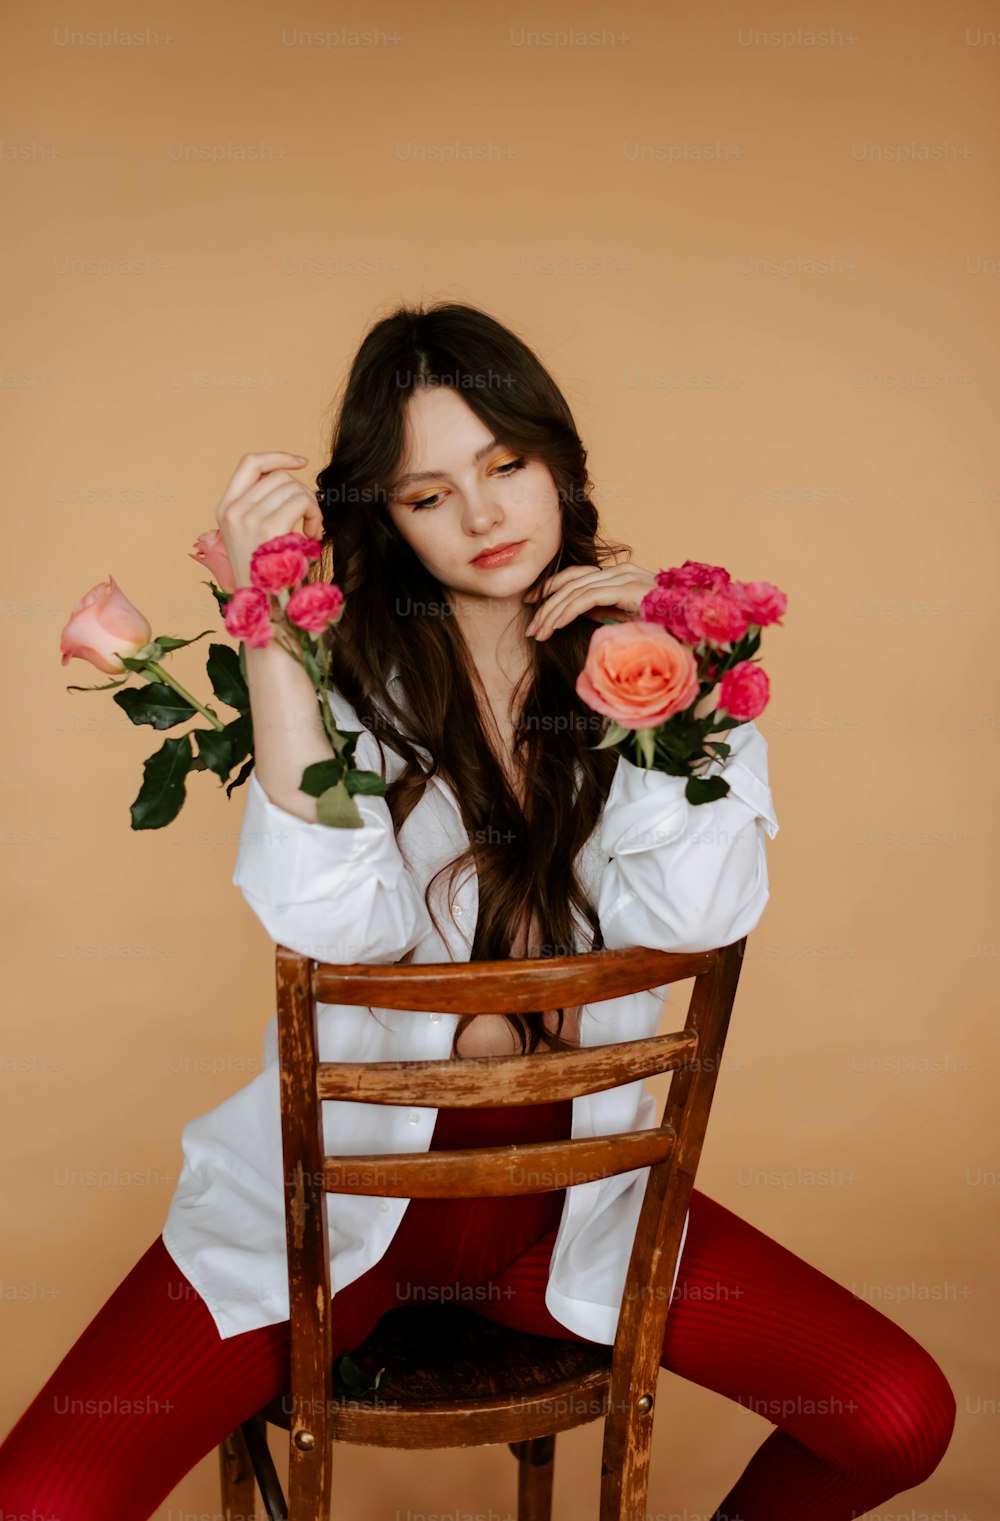 a woman sitting on a chair holding flowers